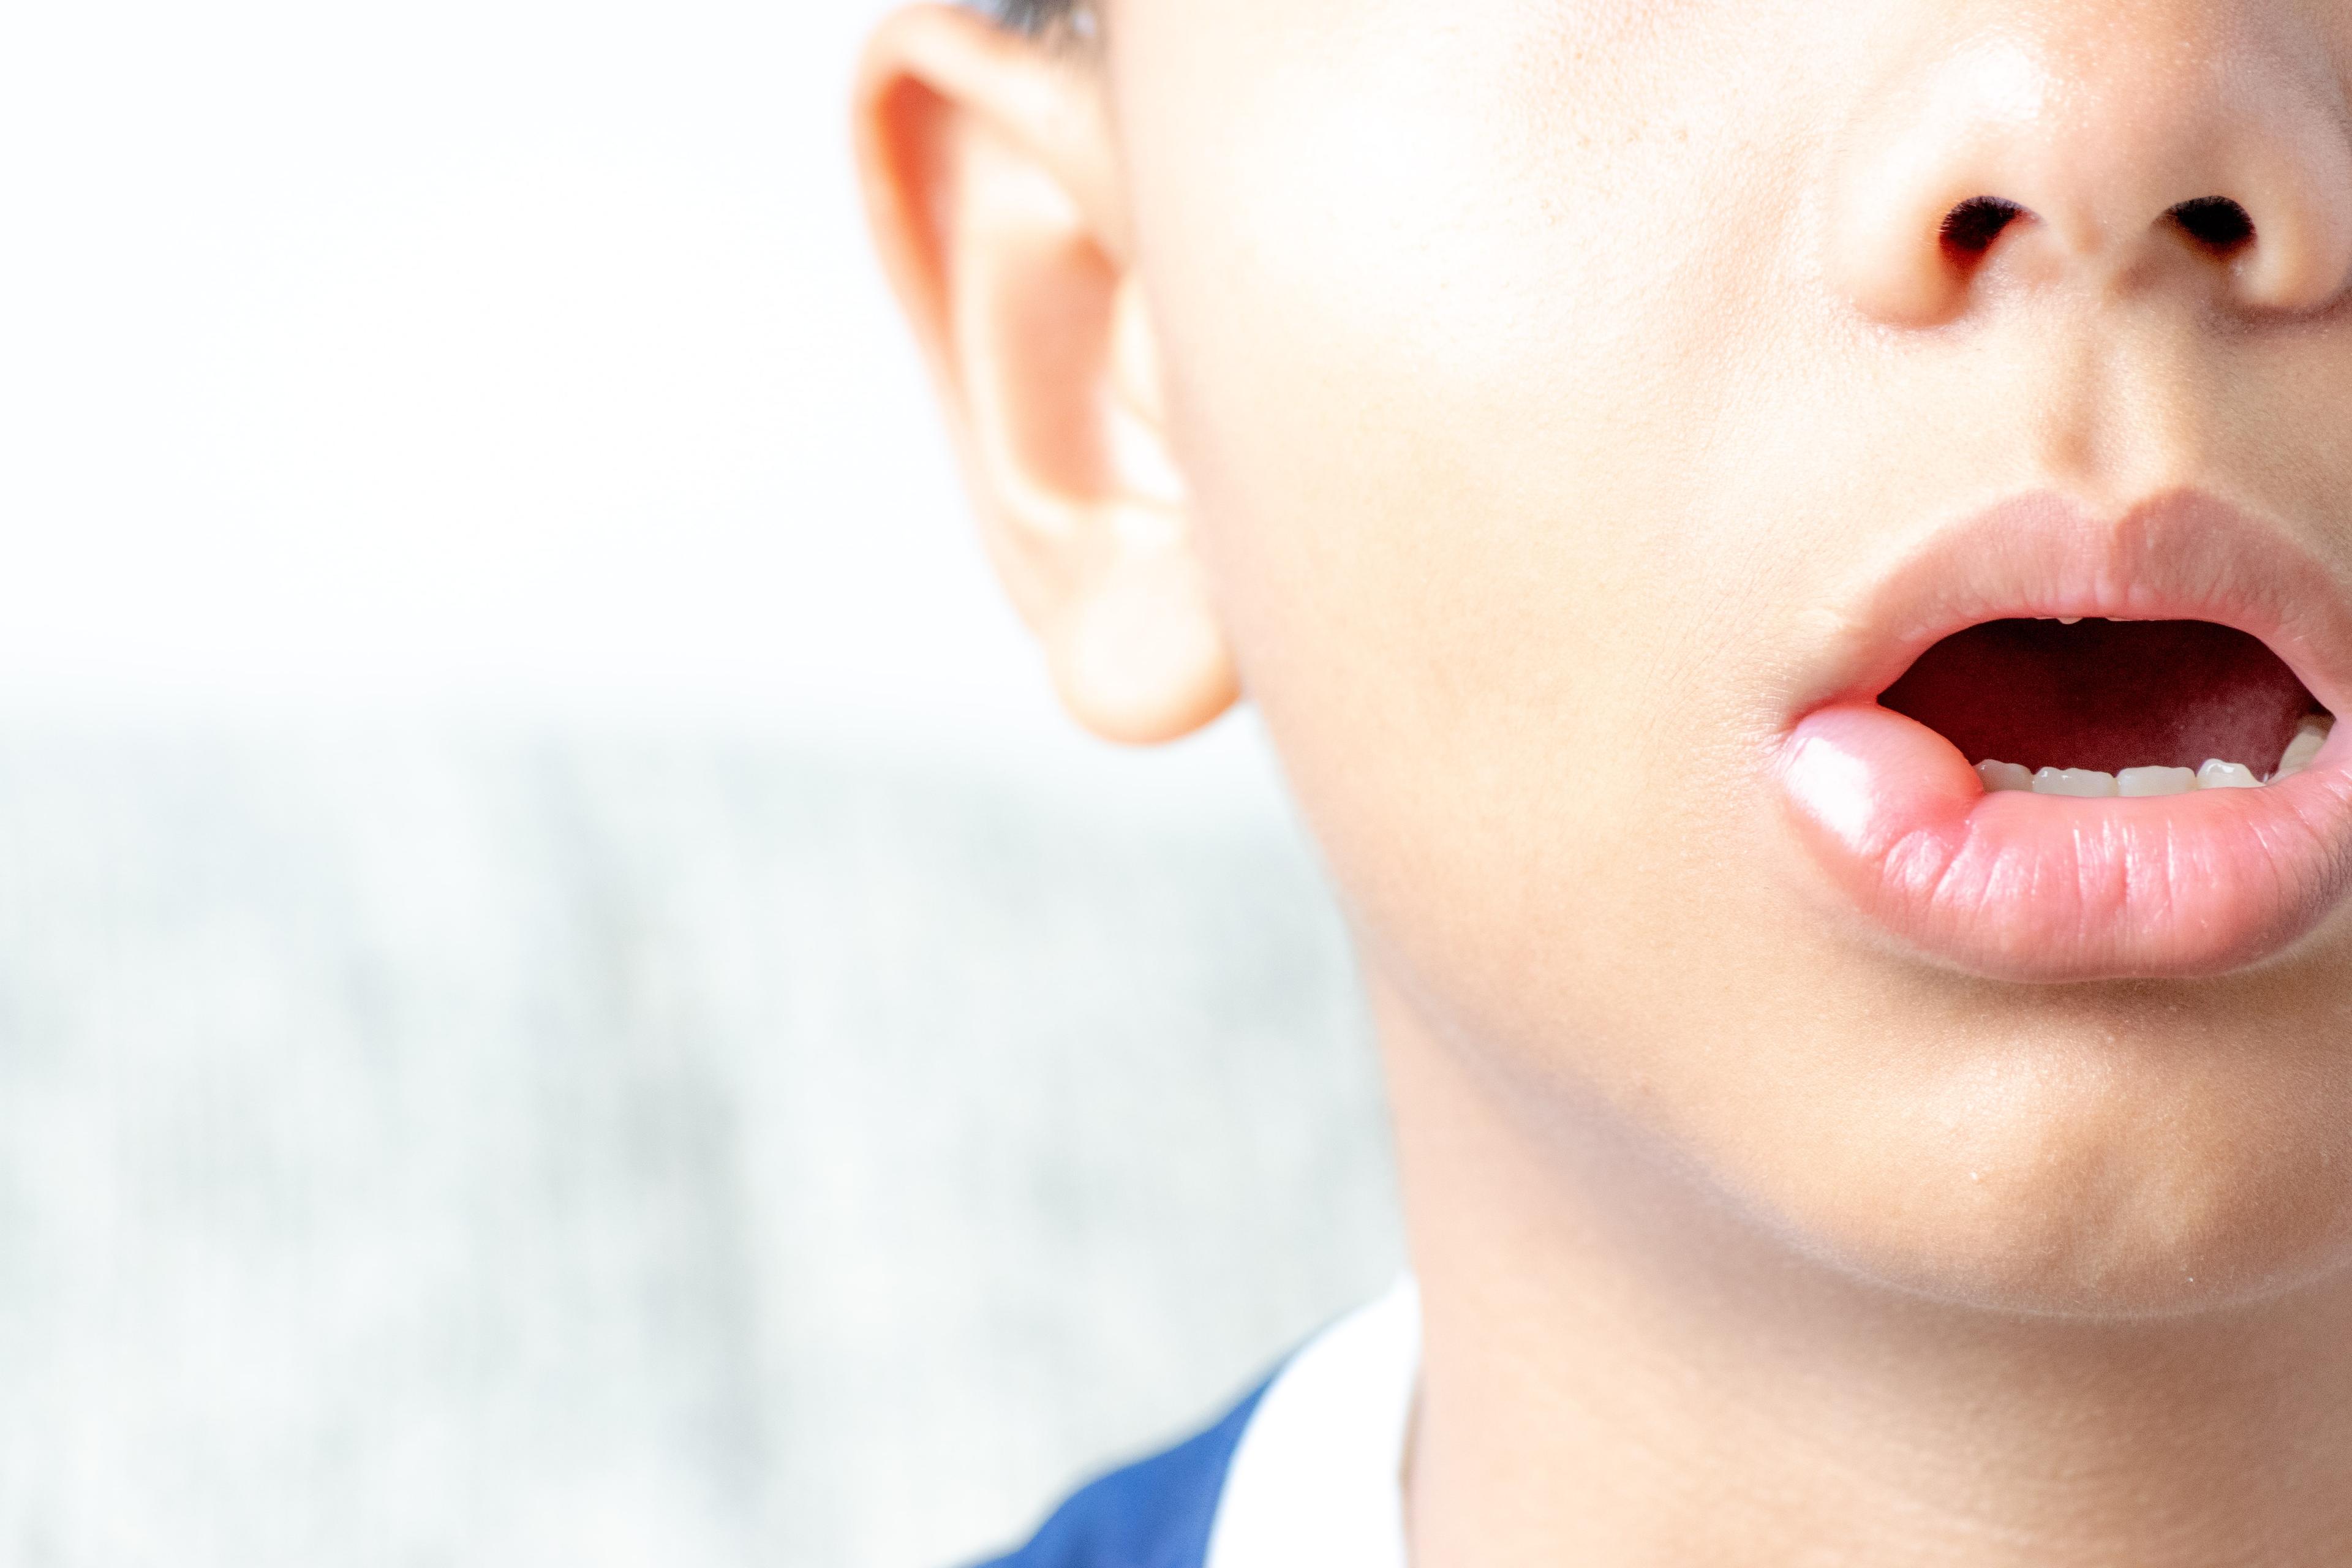 Cold Sore On Lips: Causes And Best Remedies To Dry Up Cold Sores